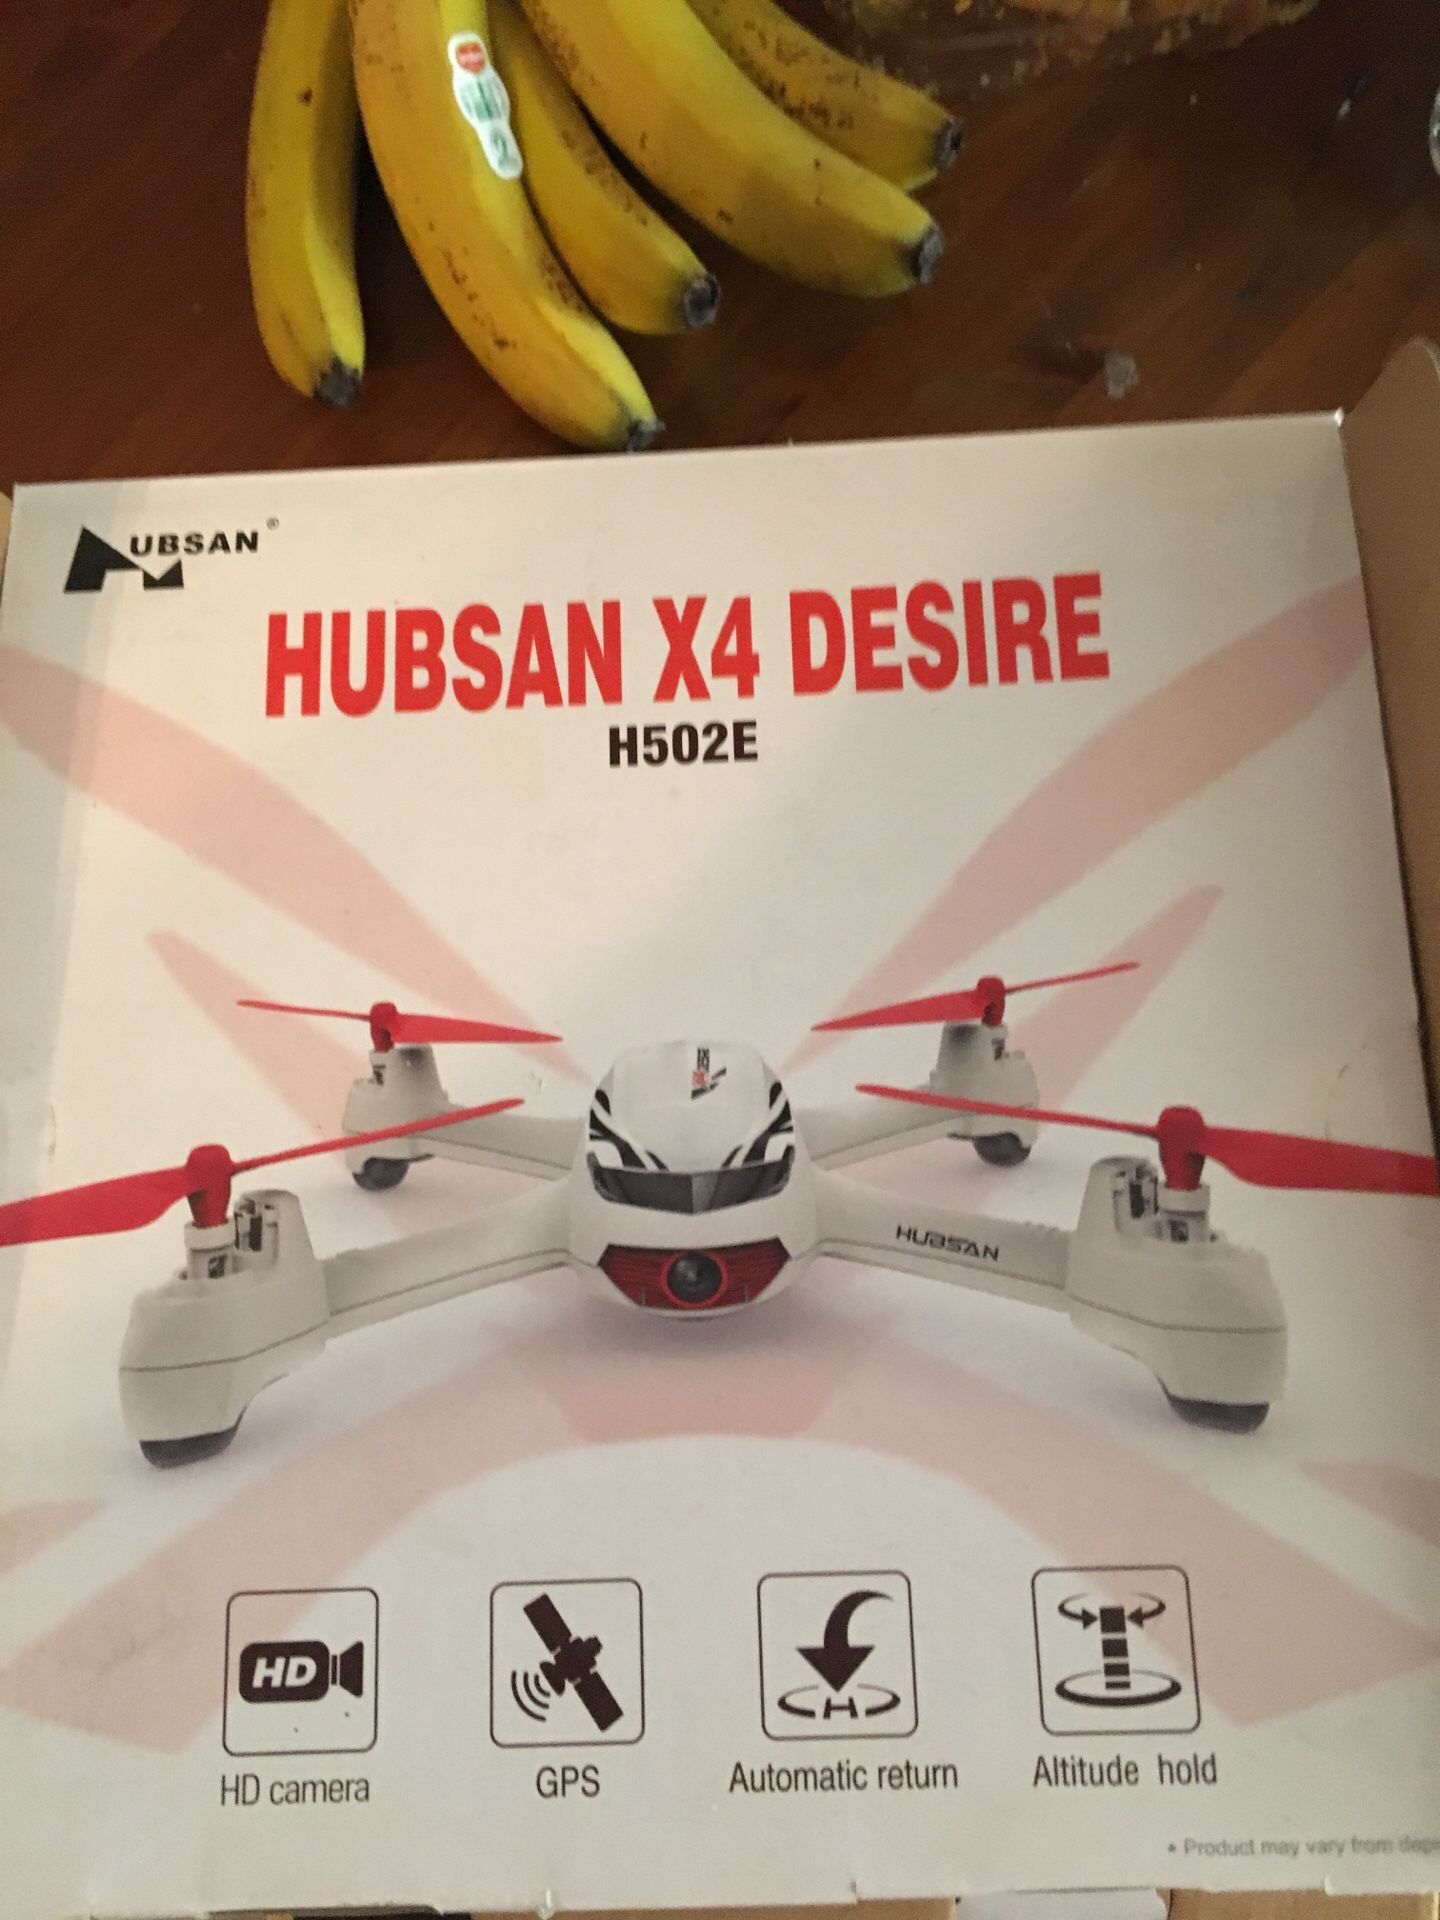 Hubs can gps drone H502e